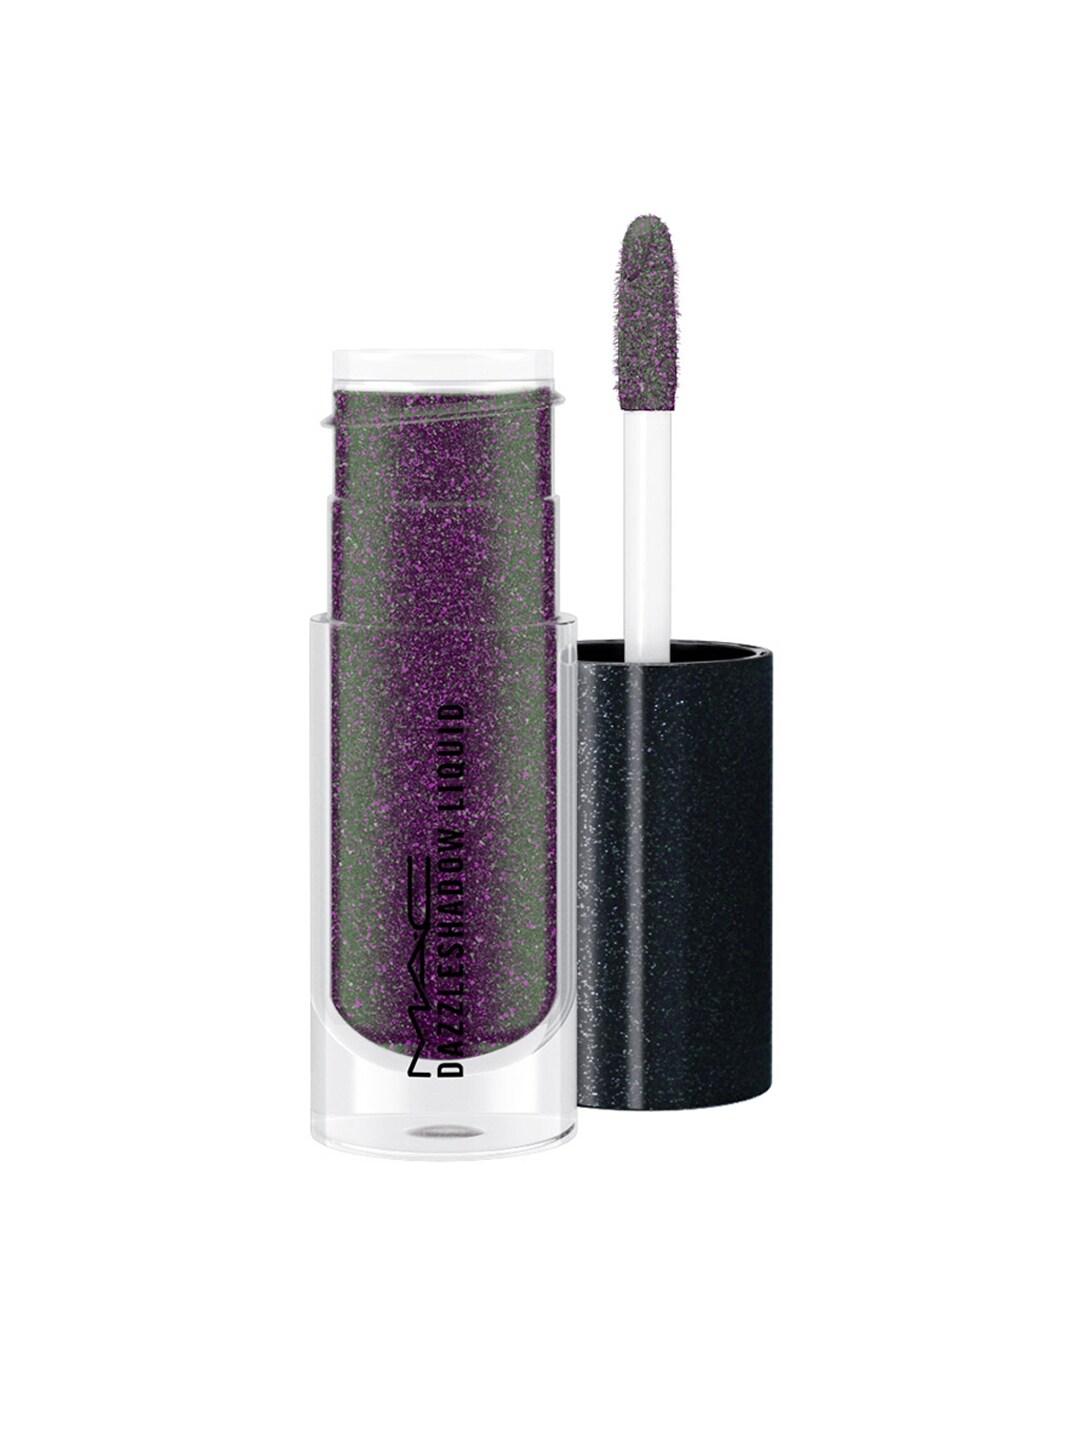 M.A.C Dazzle Liquid Eyeshadow - Panthertized 4.6g Price in India